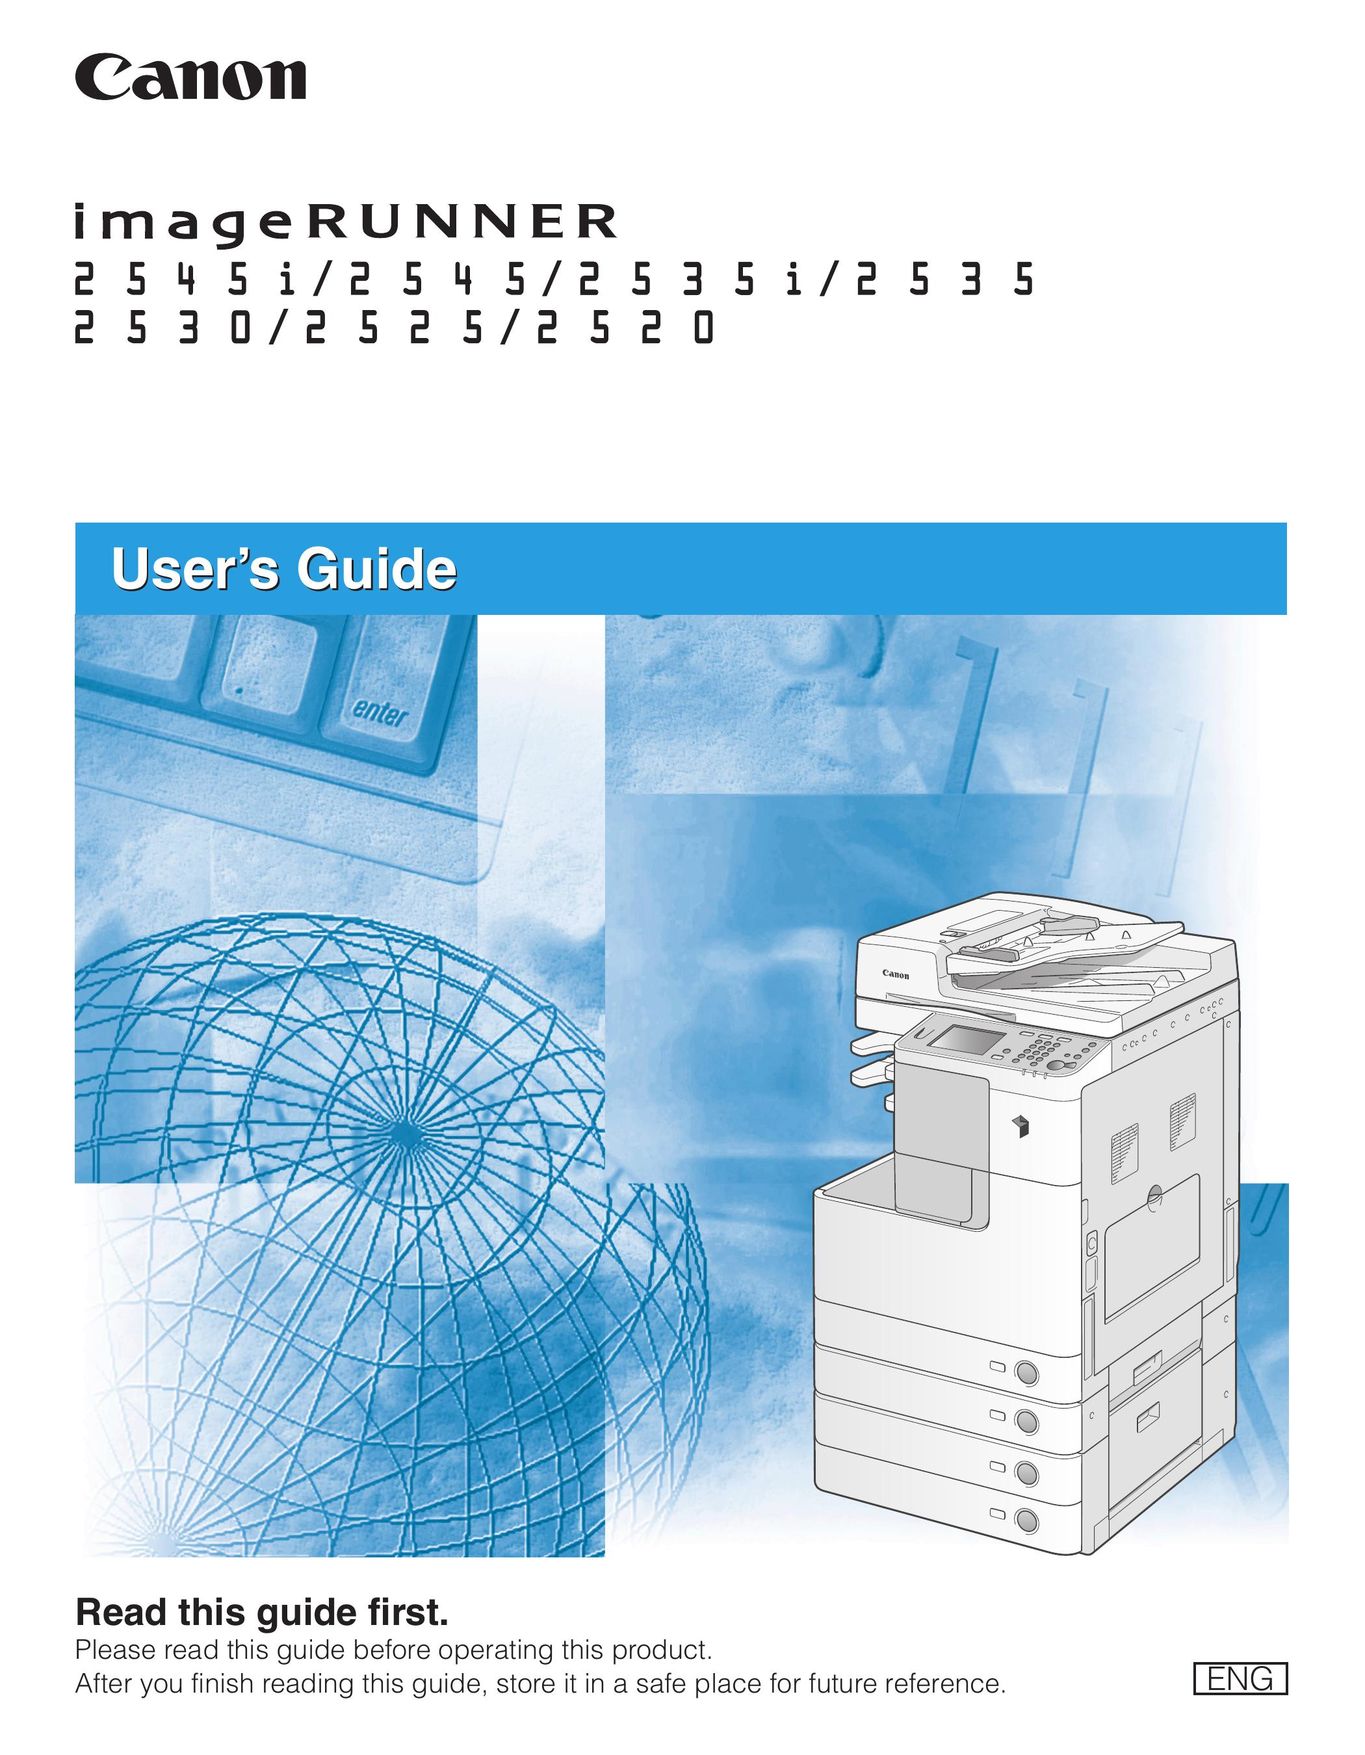 Canon 2535 All in One Printer User Manual